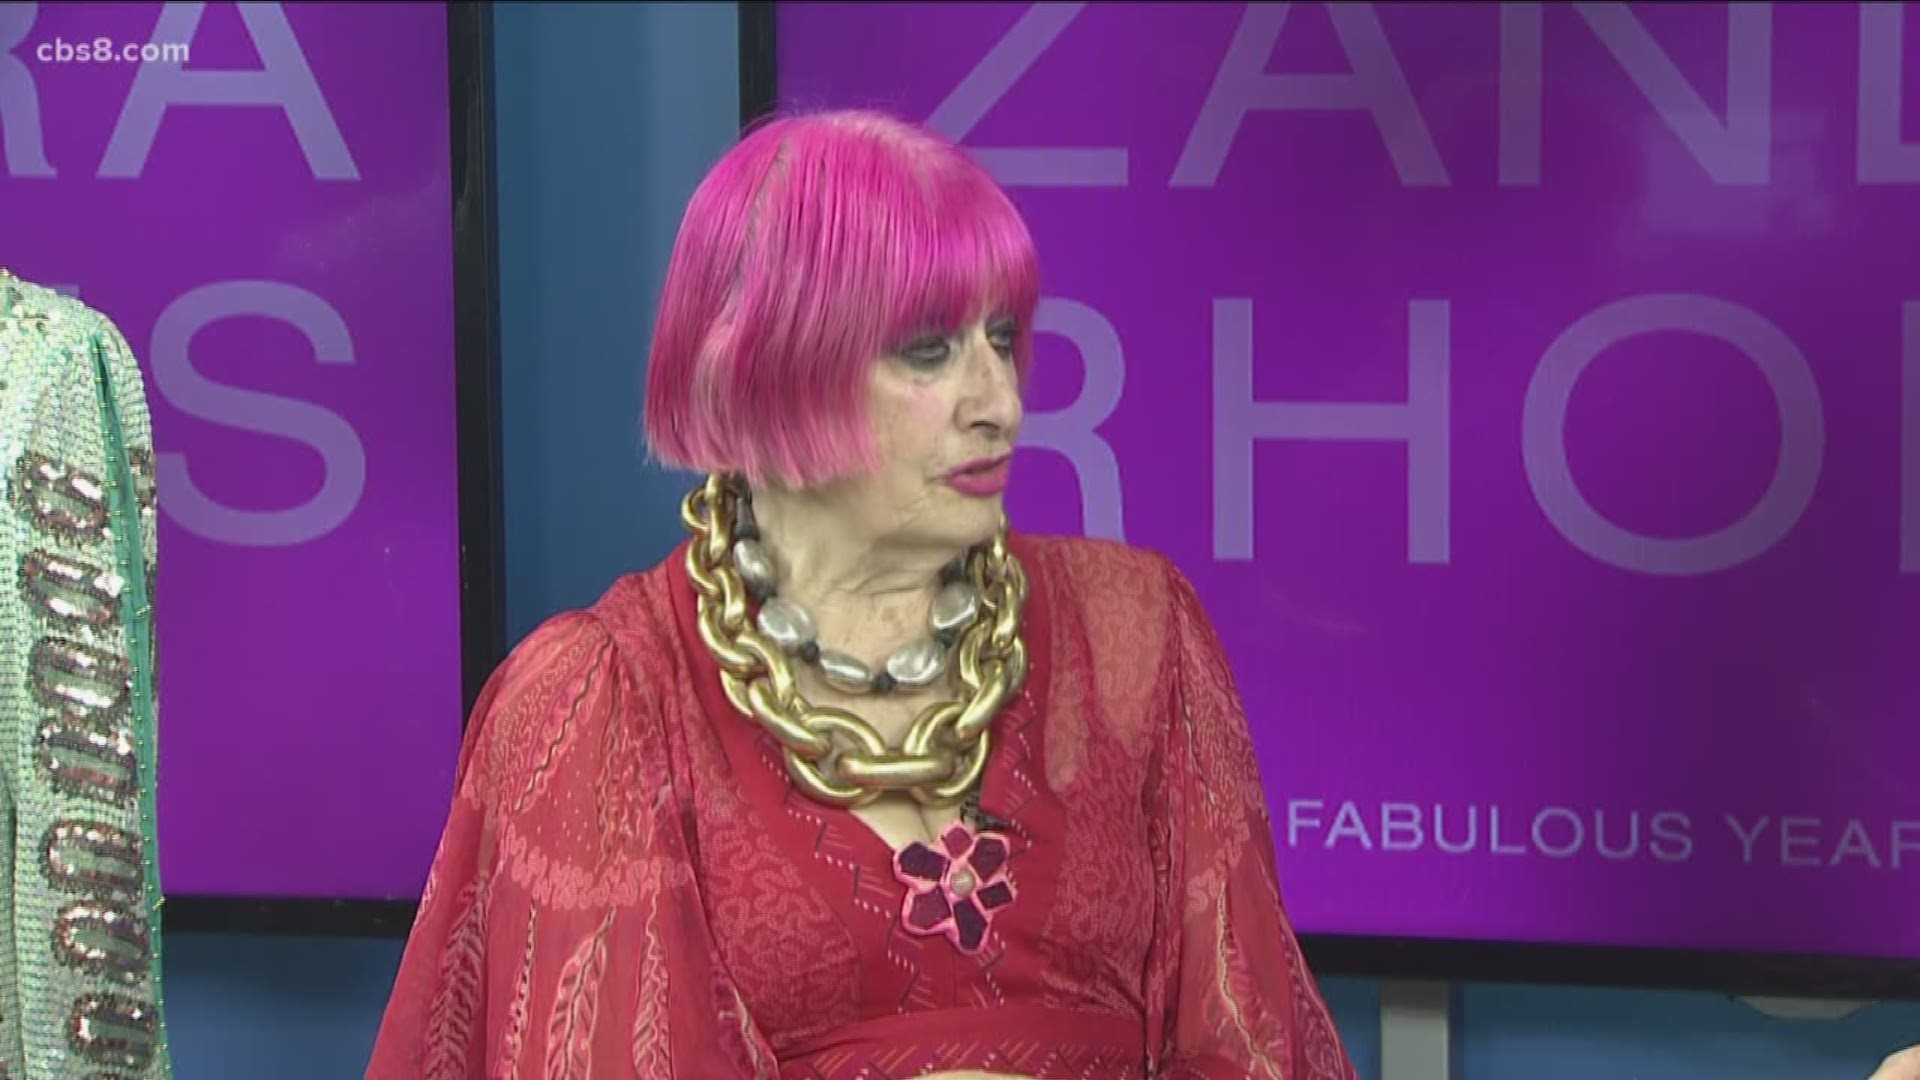 Celebrities like Barbra Streisand and Cher wear her looks. Now, Zandra Rhodes is celebrating a decorated career with a new book.